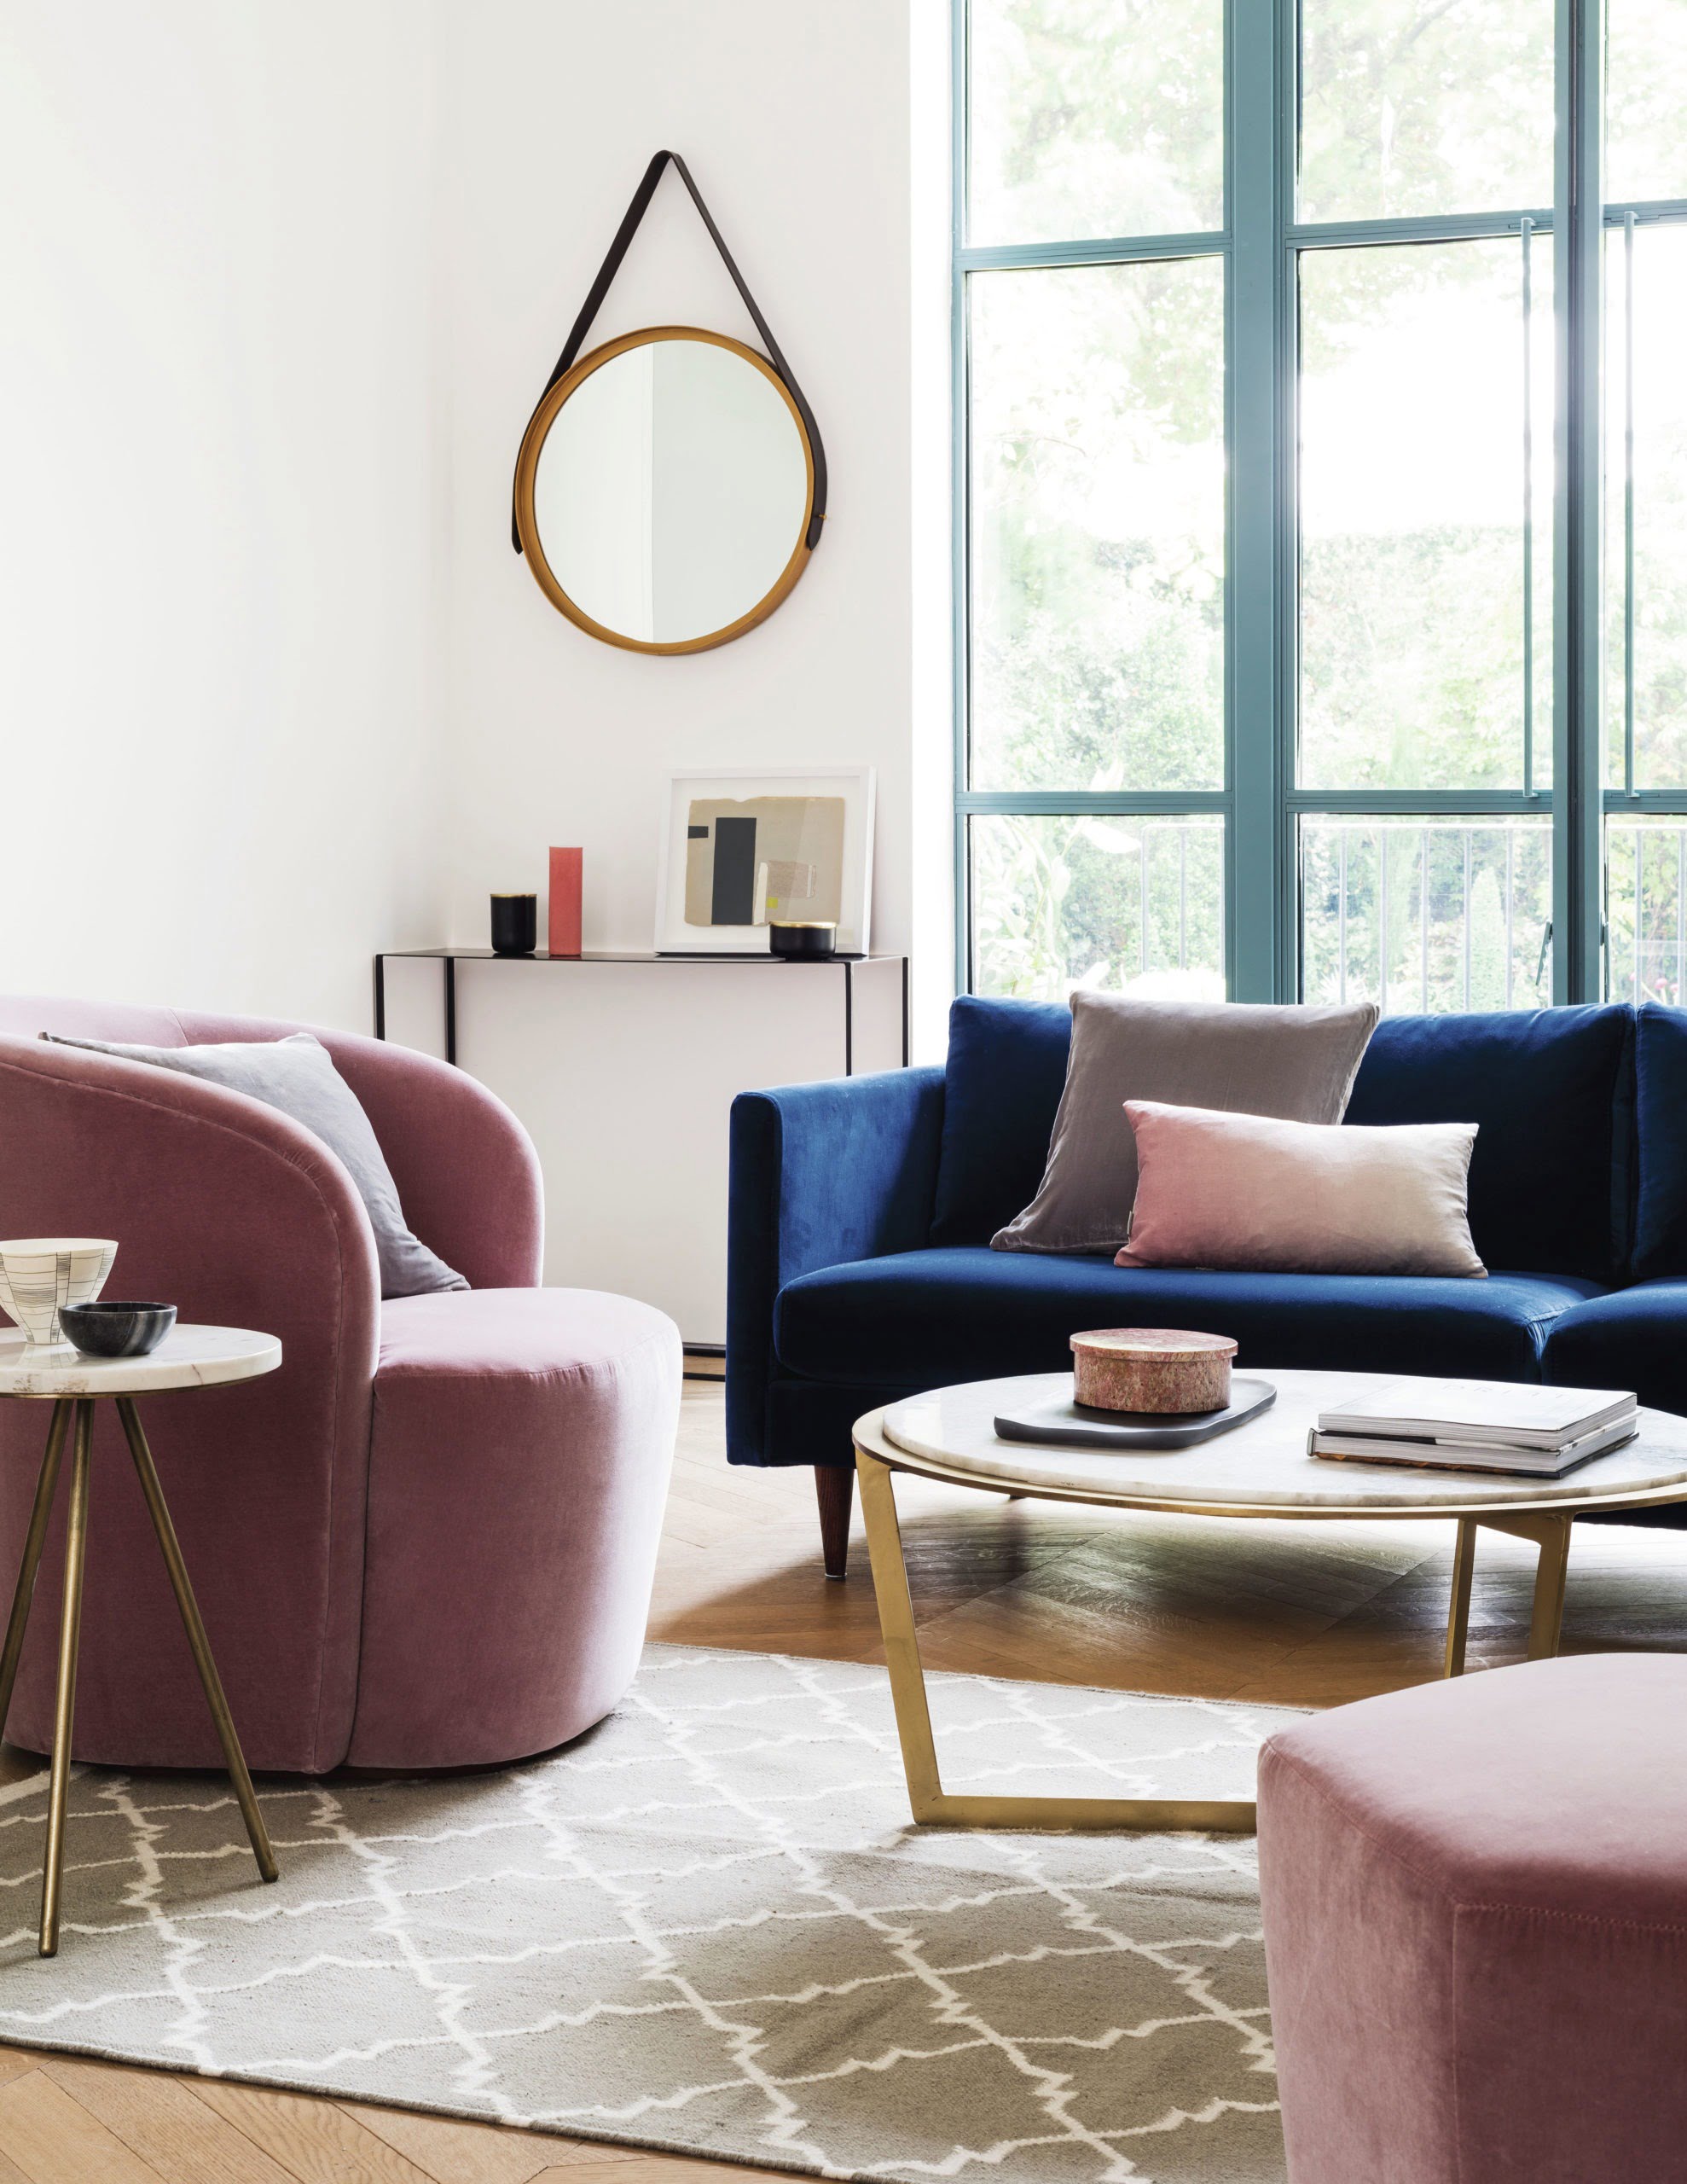 Tips and tricks on how to style your home so that you can create a space you'll love with tips from interior stylist Maxine Brady